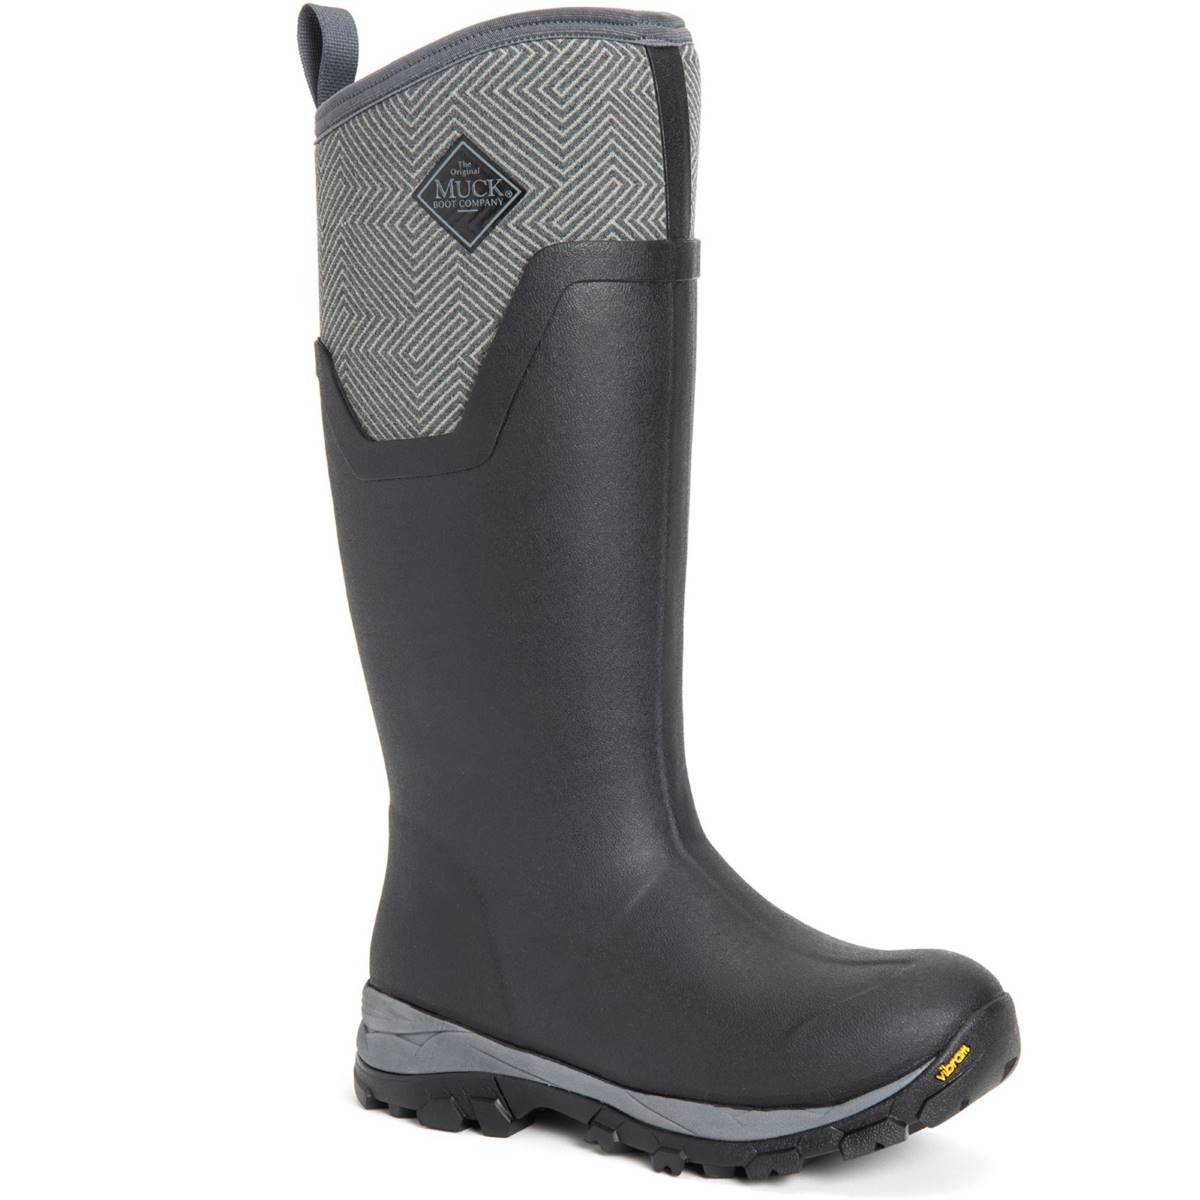 Muck Boots Arctic Ice Tall Agat Black Womens Wellingtons ASVTA-101 in a Plain Rubber in Size 4